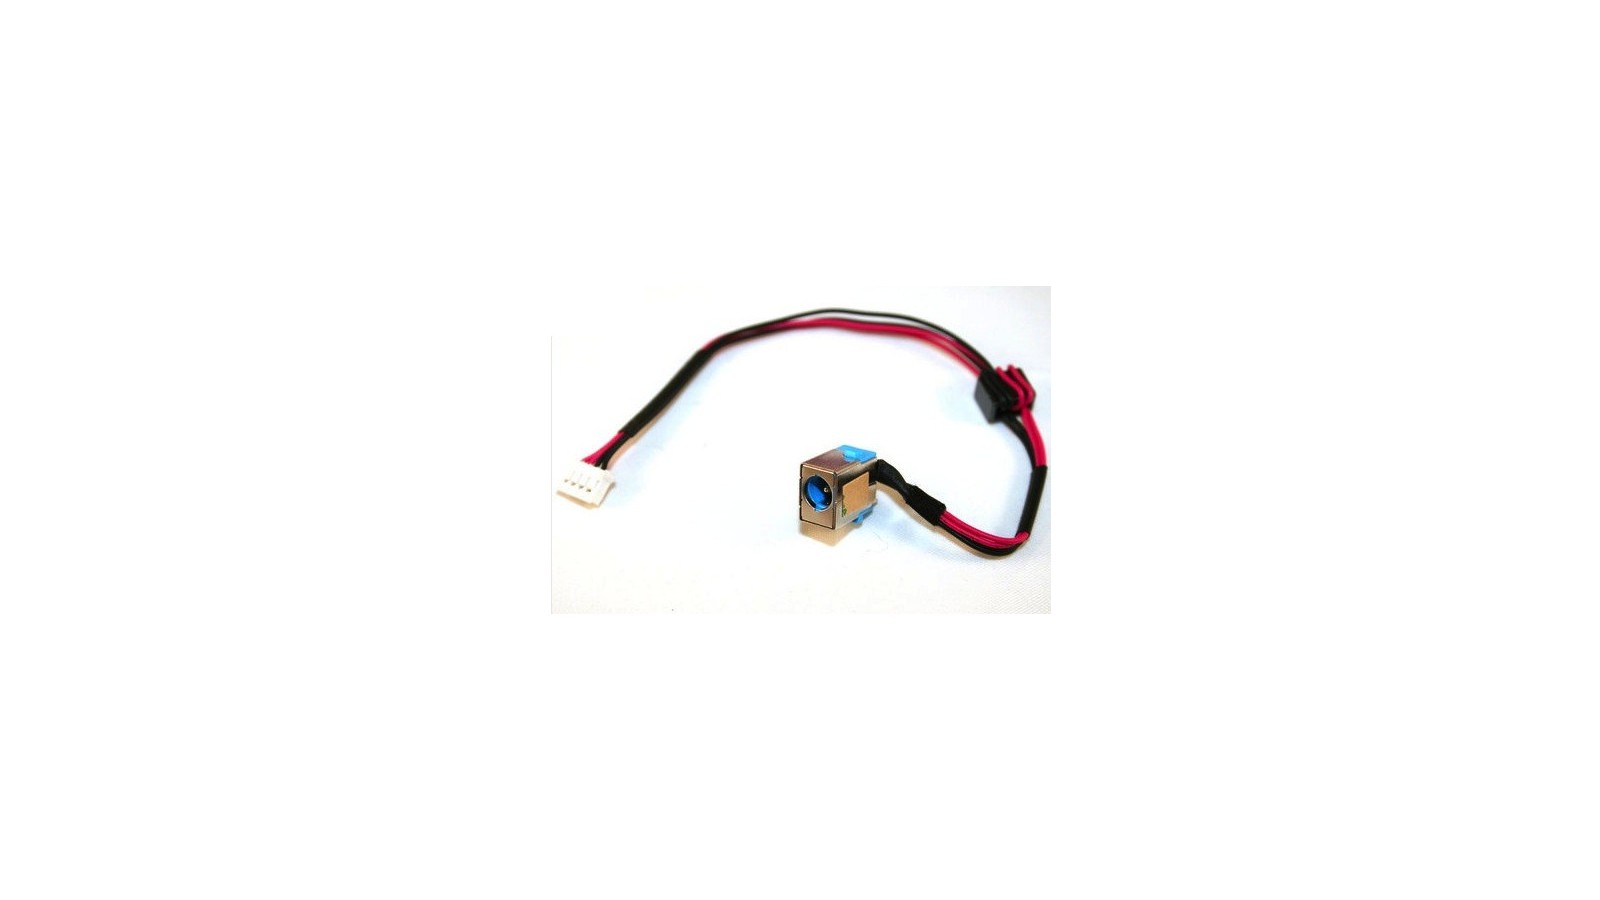 DC Power Jack Packard Bell Easynote P5WS0